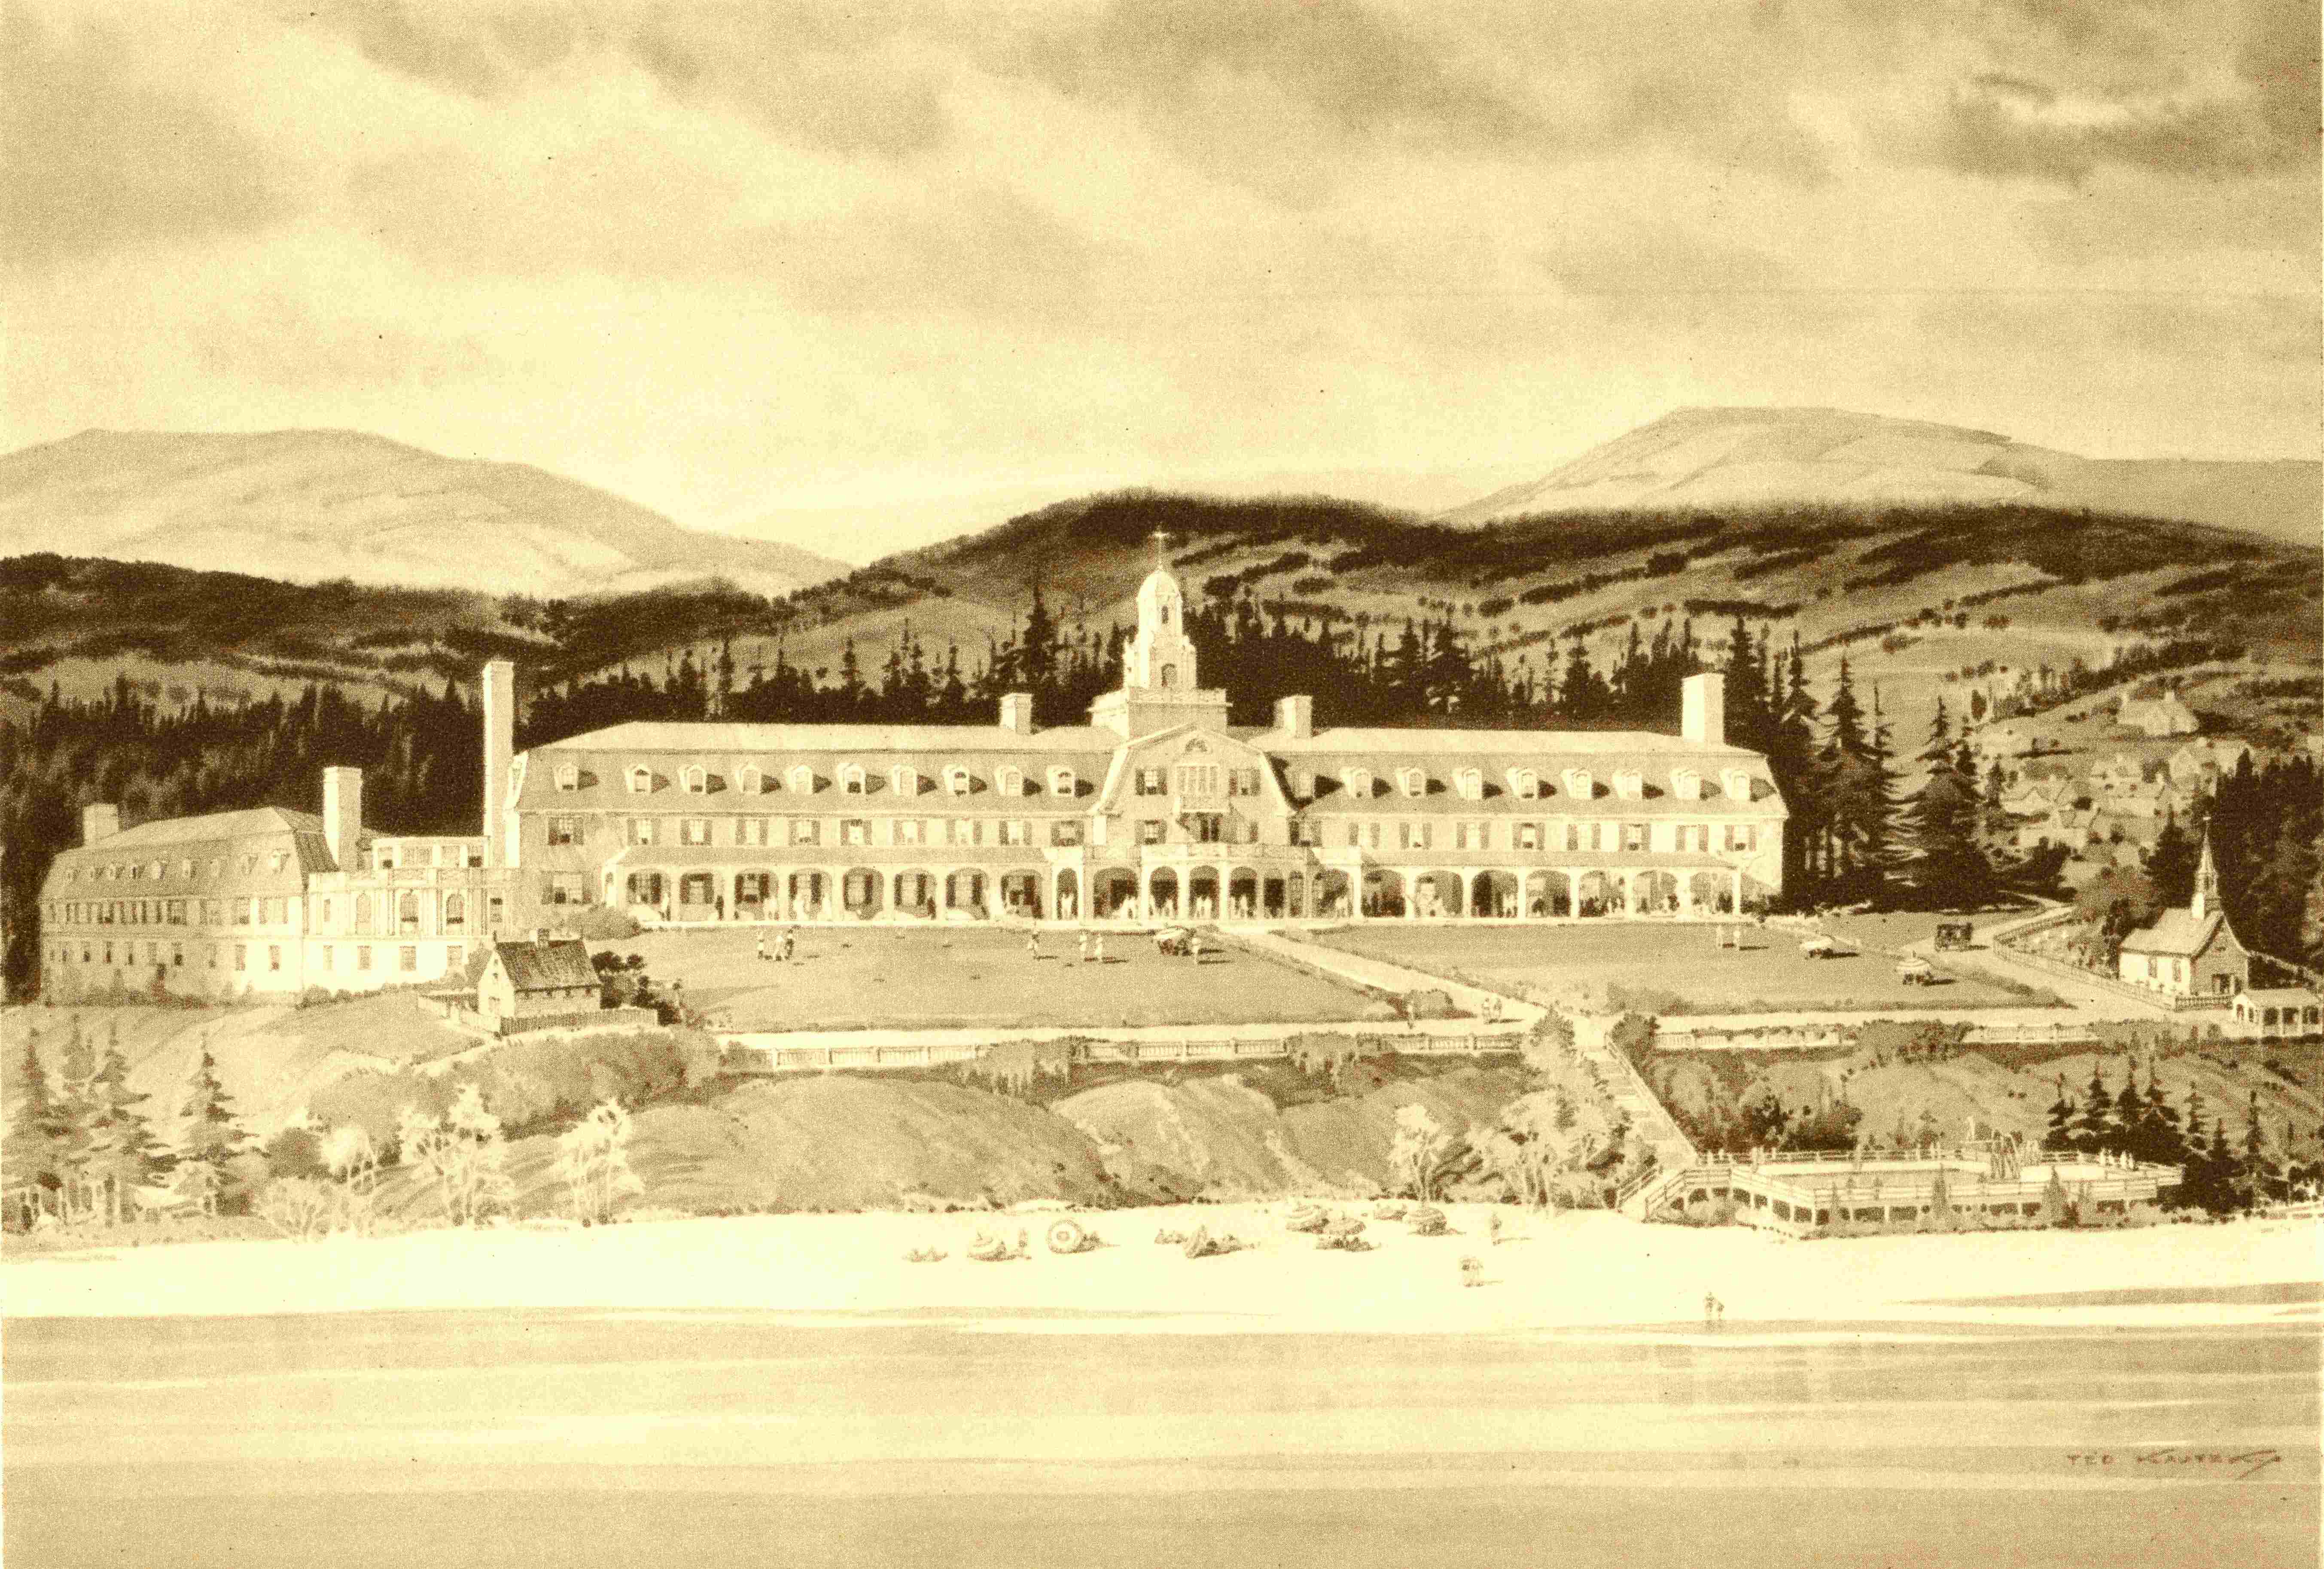 A watercolour showing a grand hotel built between beach and mountains.